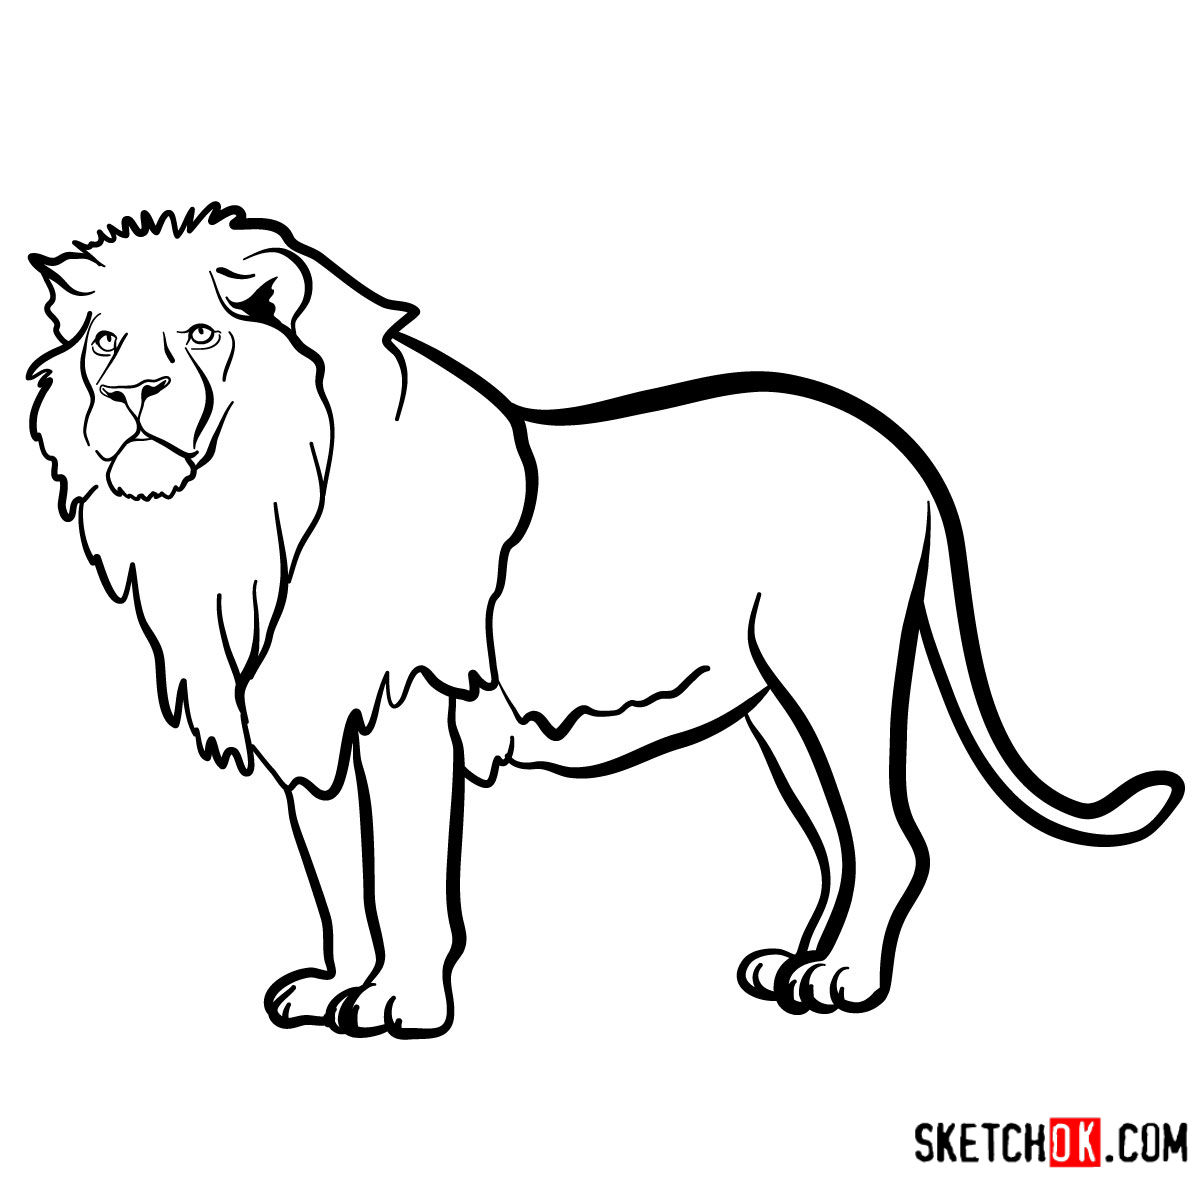 How to draw a Lion standing Wild Animals Step by step